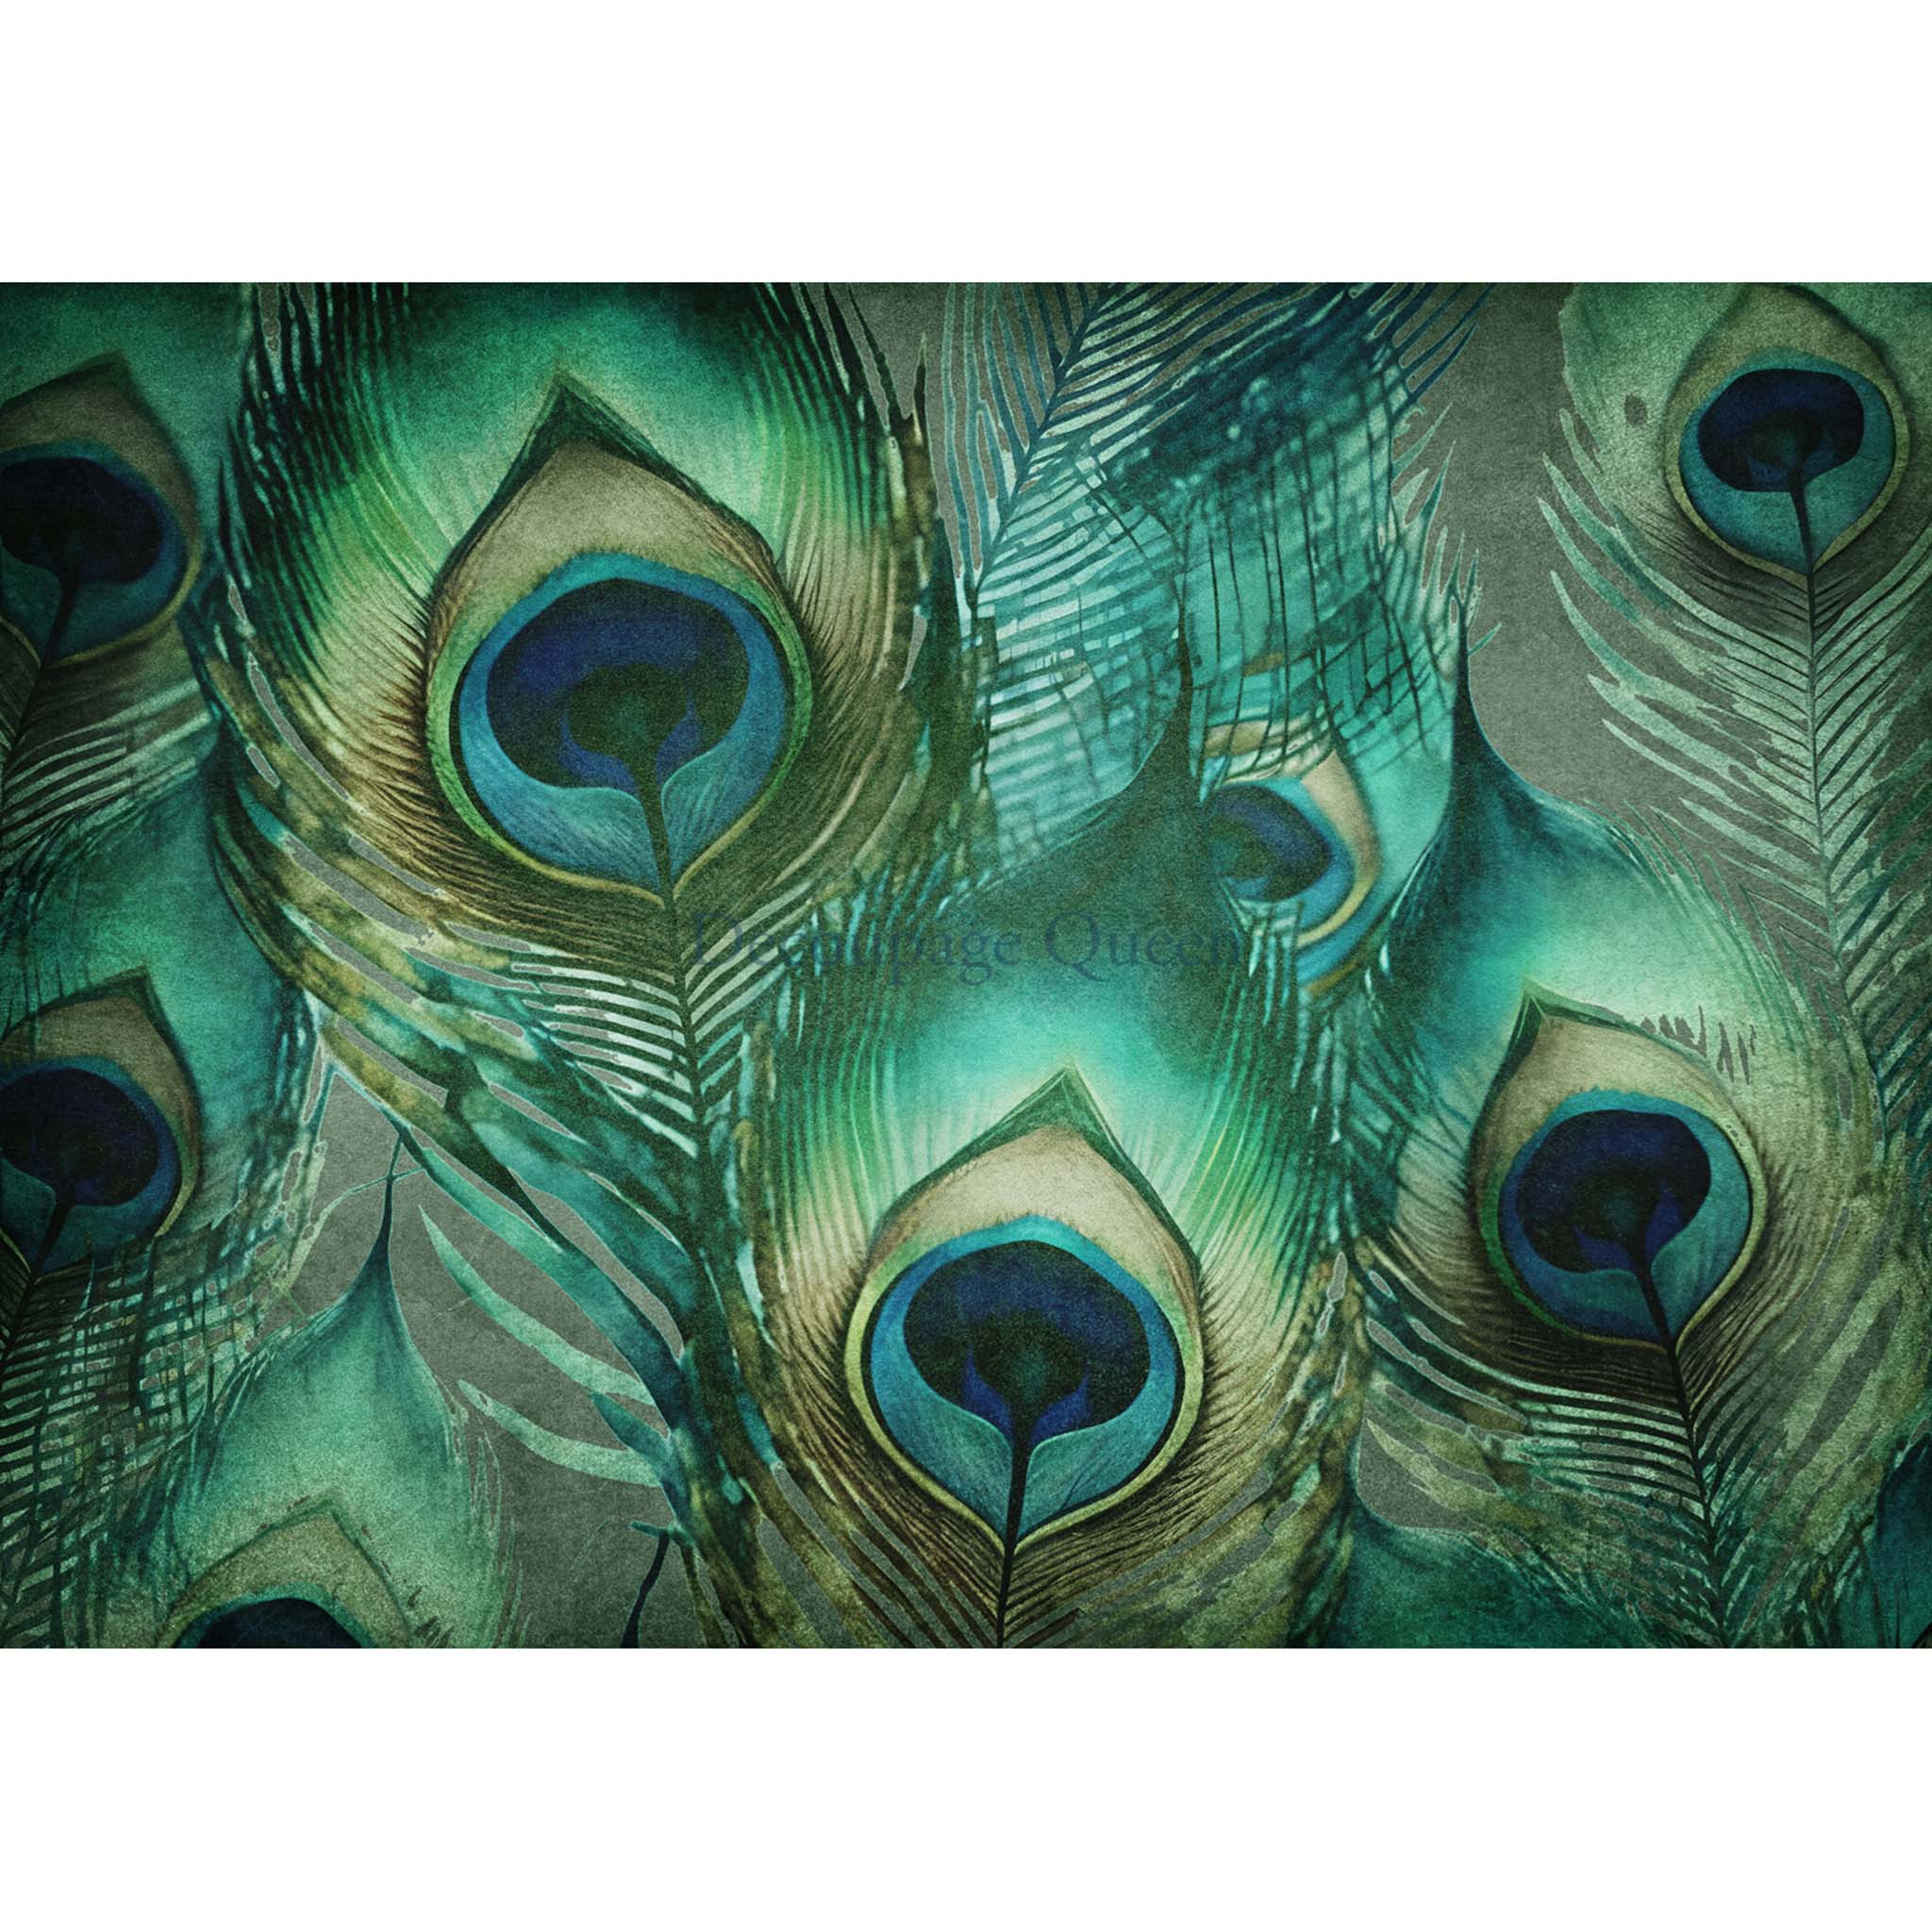 A0 rice paper design that features a closeup of peacock feathers in shades of jade, teal, and navy. White borders are on the top and bottom.